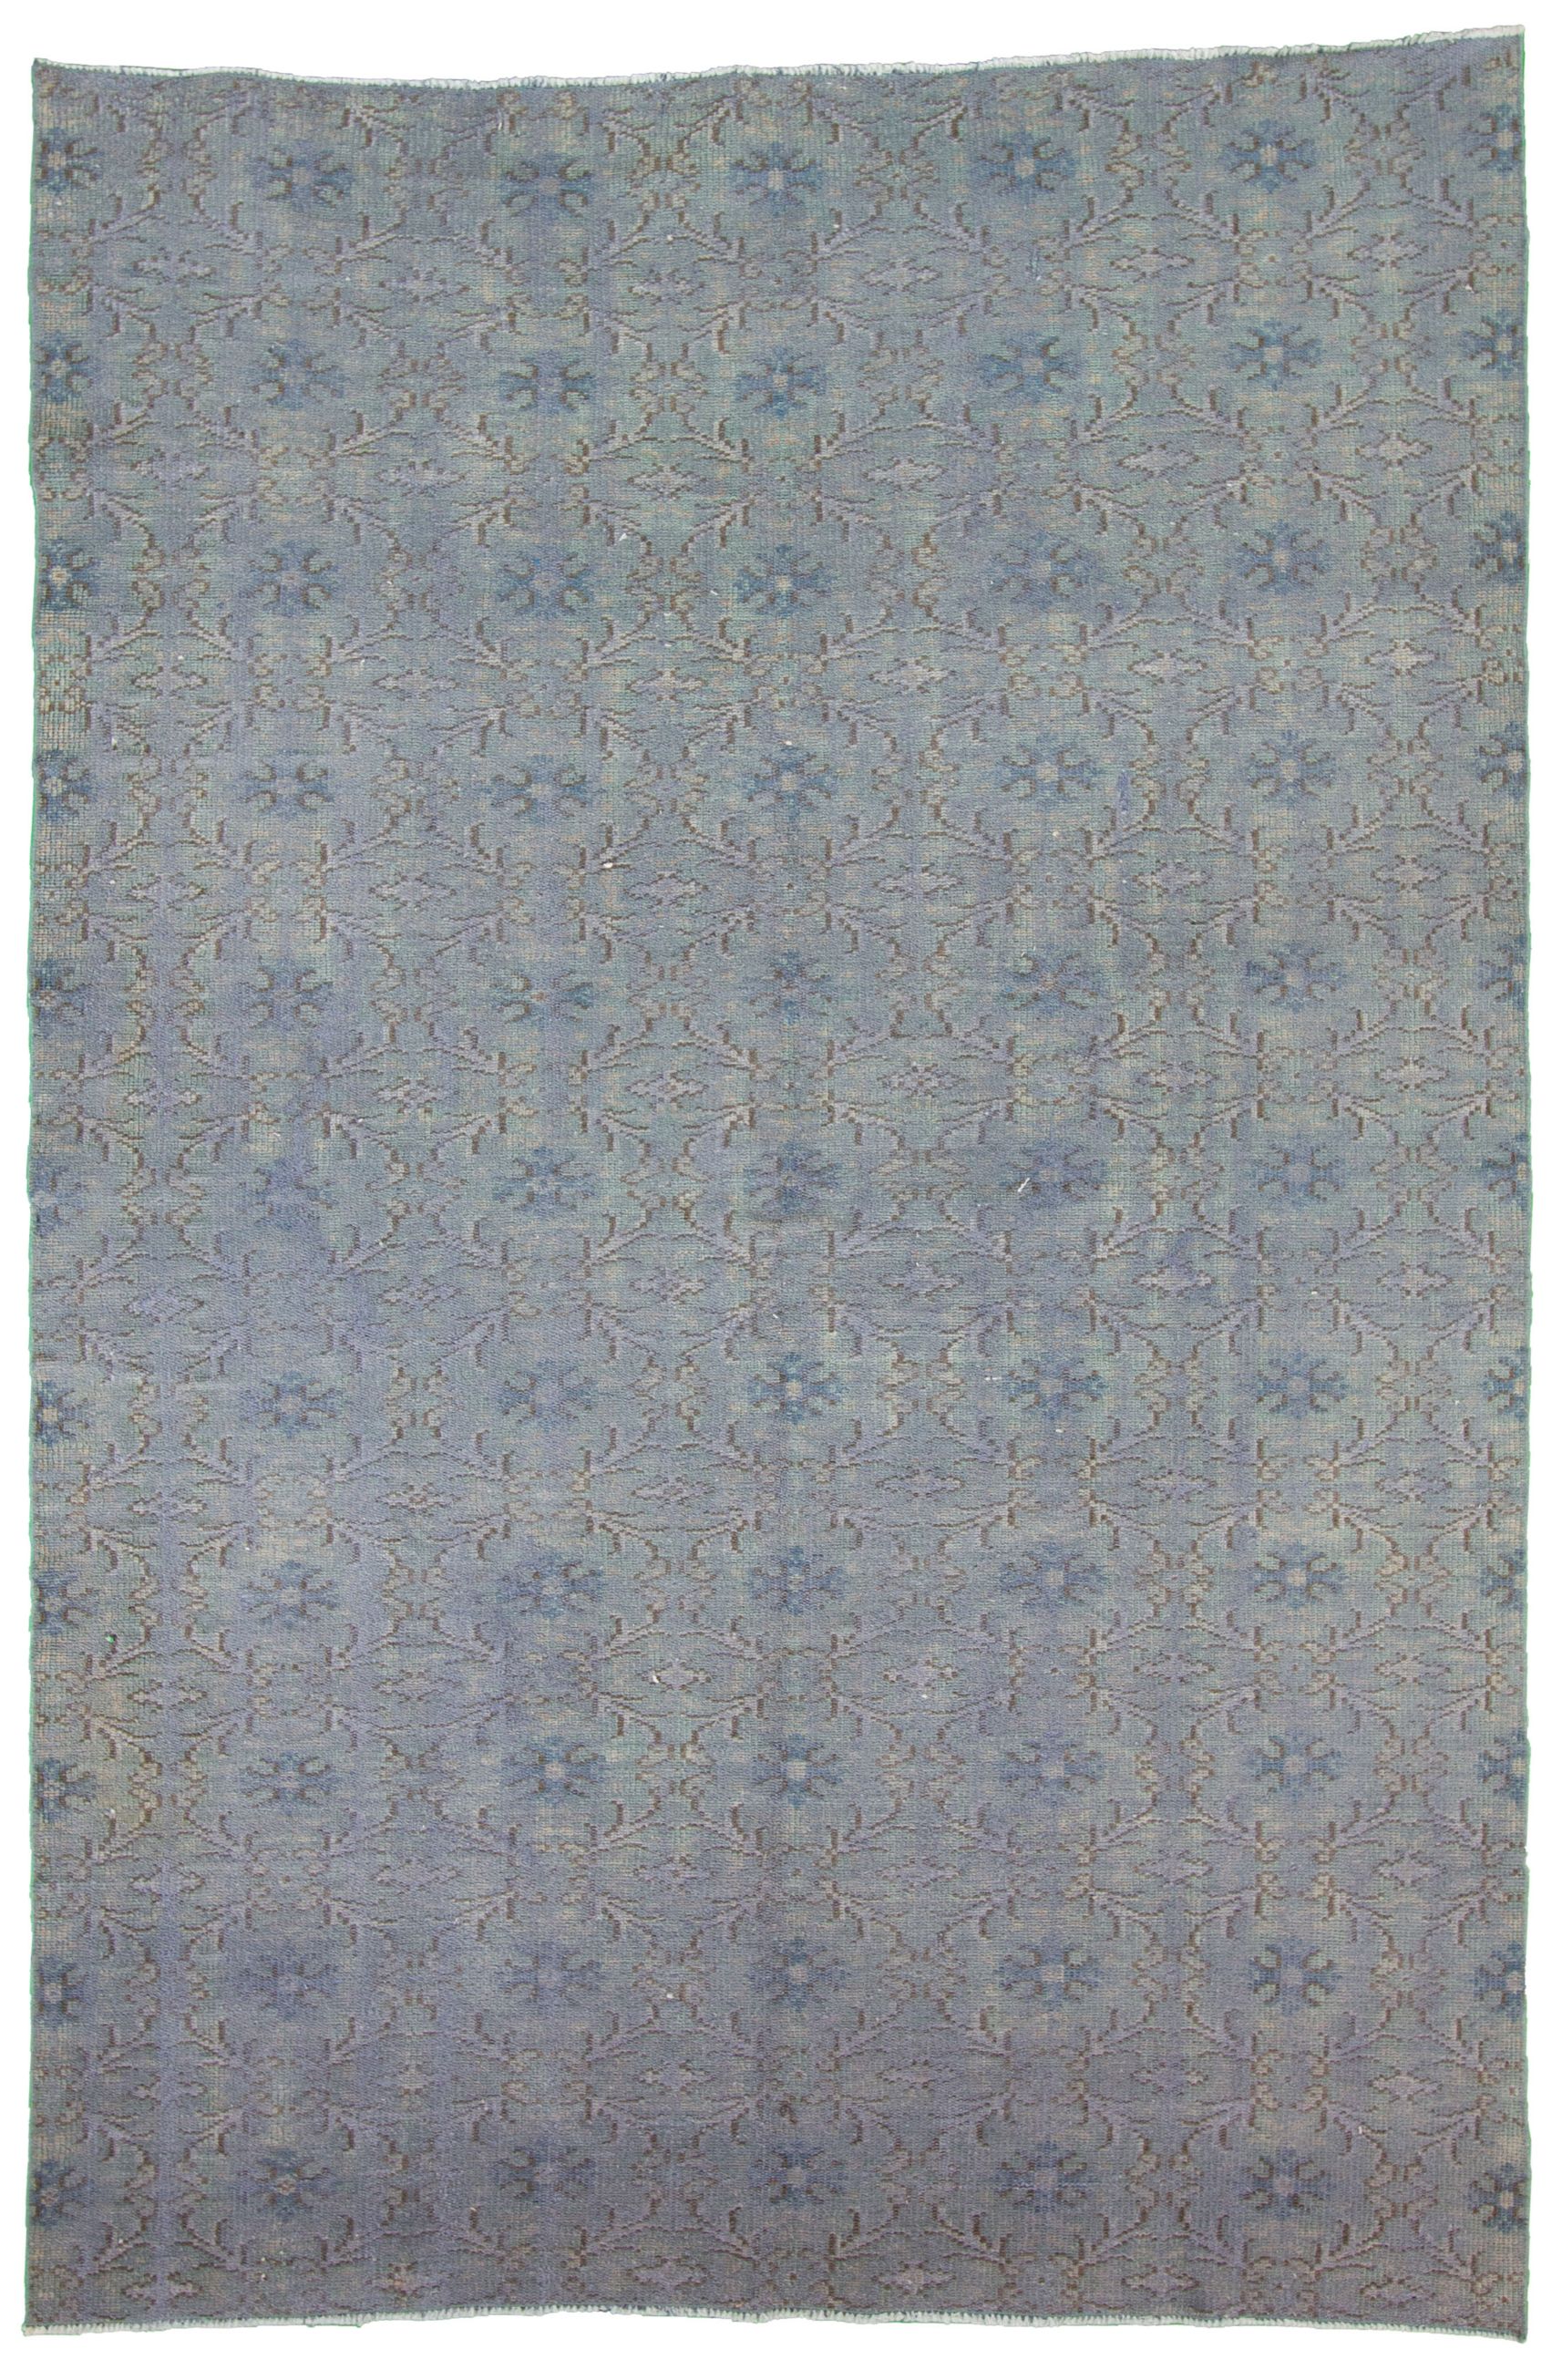 Hand-knotted Color Transition  Rug 6'0" x 9'7" Size: 6'0" x 9'7"  